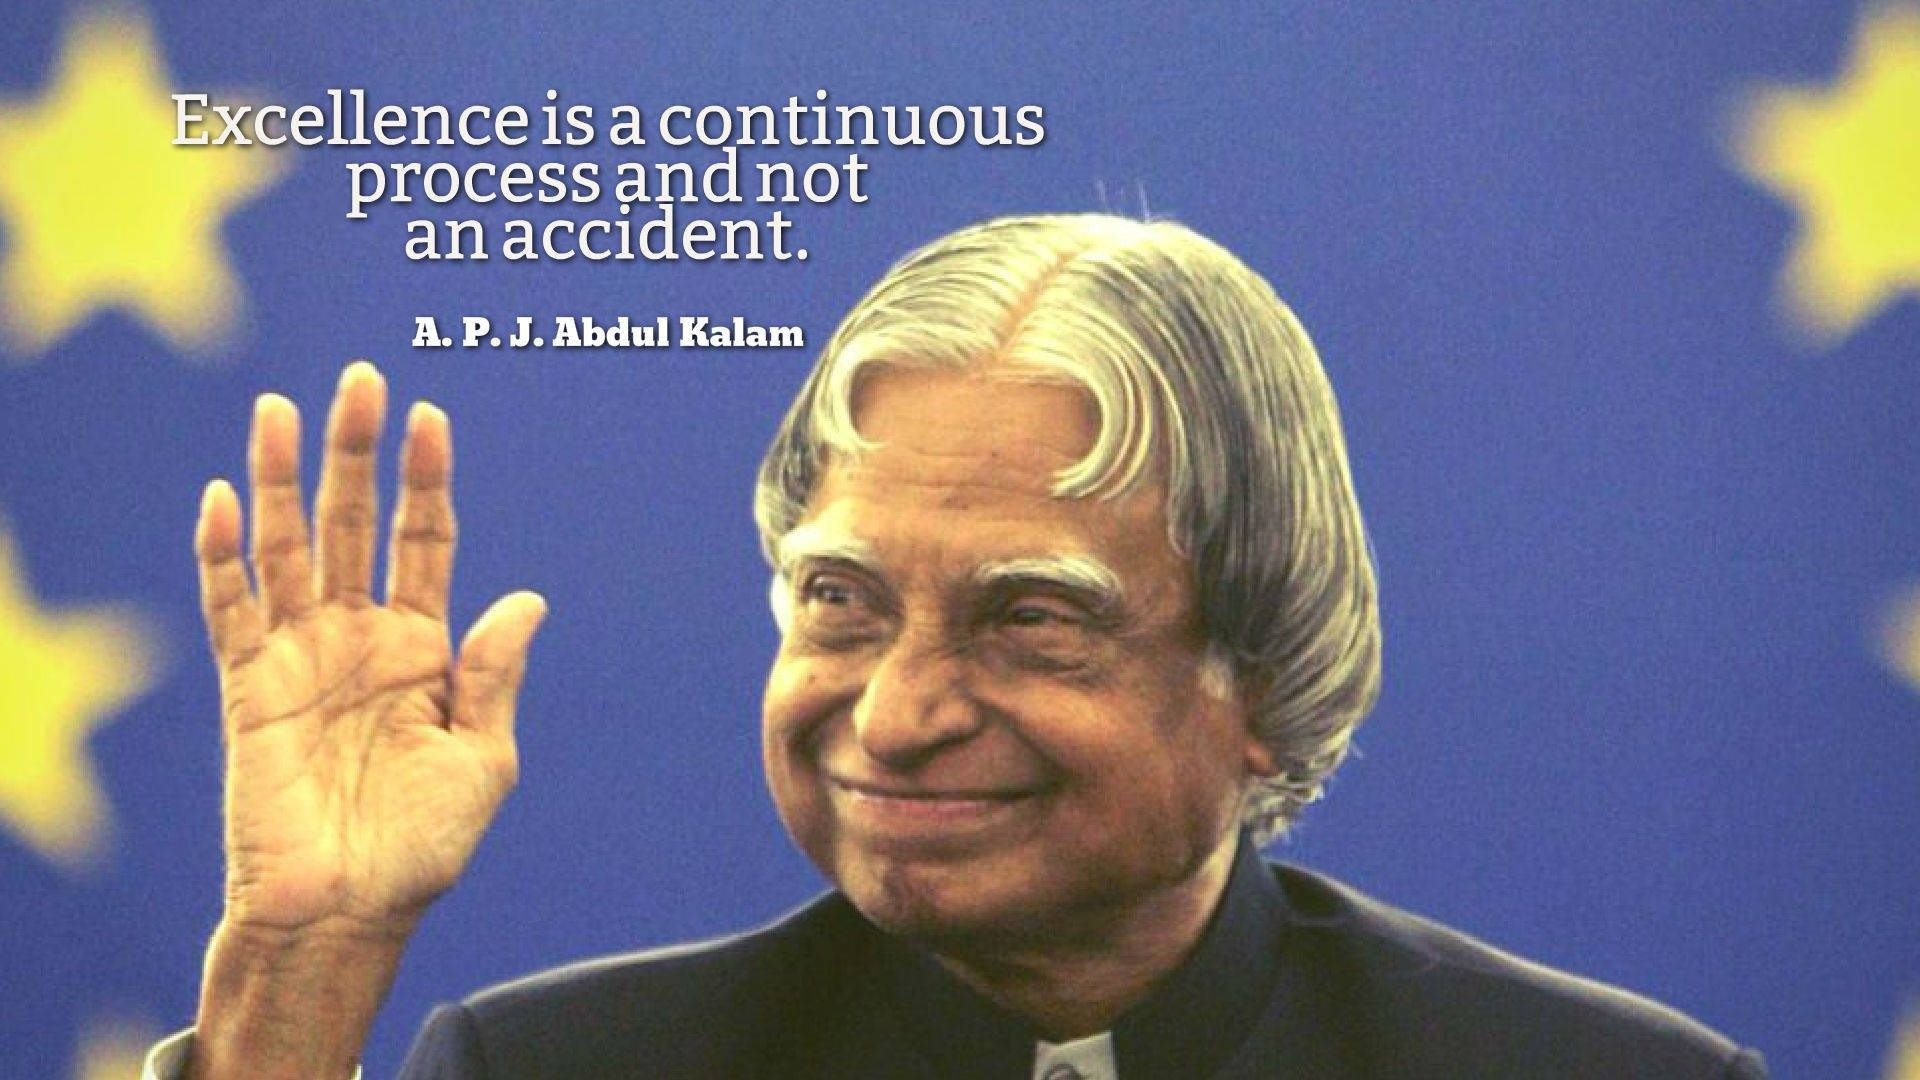 Abdul Kalam Hd Excellence Quote